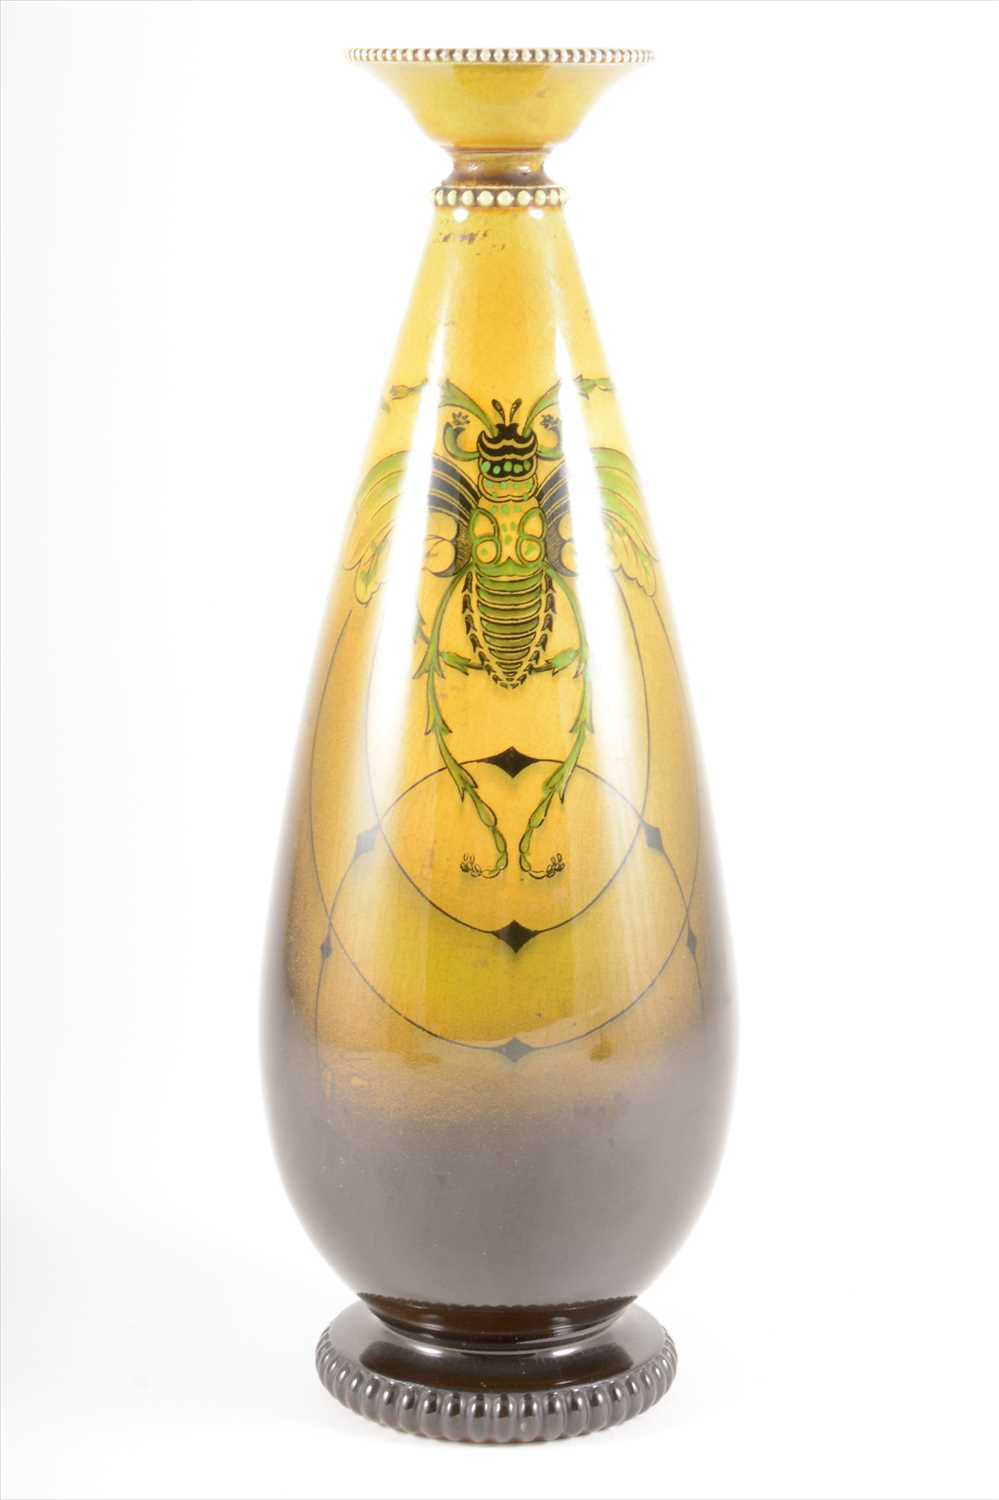 Lot 19 - An Art Pottery vase with beetle design, by Thomas Forester Pottery.